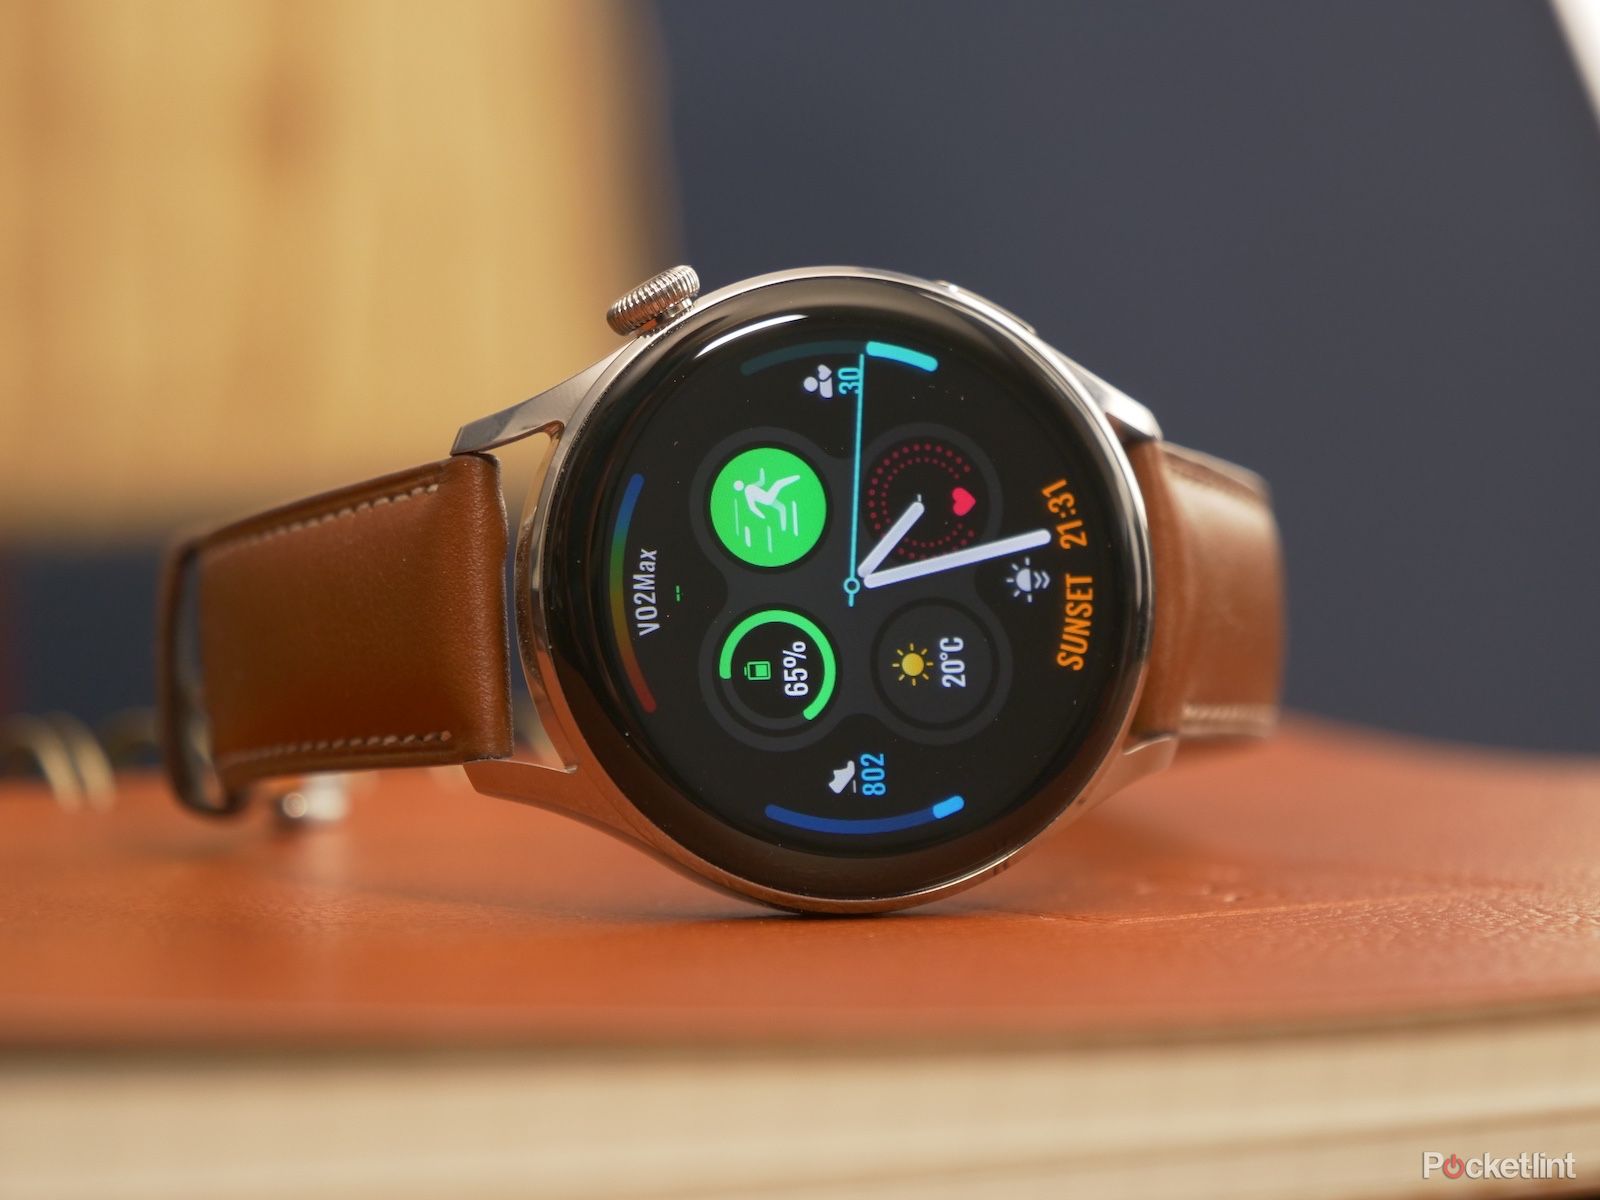 https://static1.pocketlintimages.com/wordpress/wp-content/uploads/wm/157142-smartwatches-review-hands-on-huawei-watch-3-initial-review-image1-p9twpab0gx.JPG